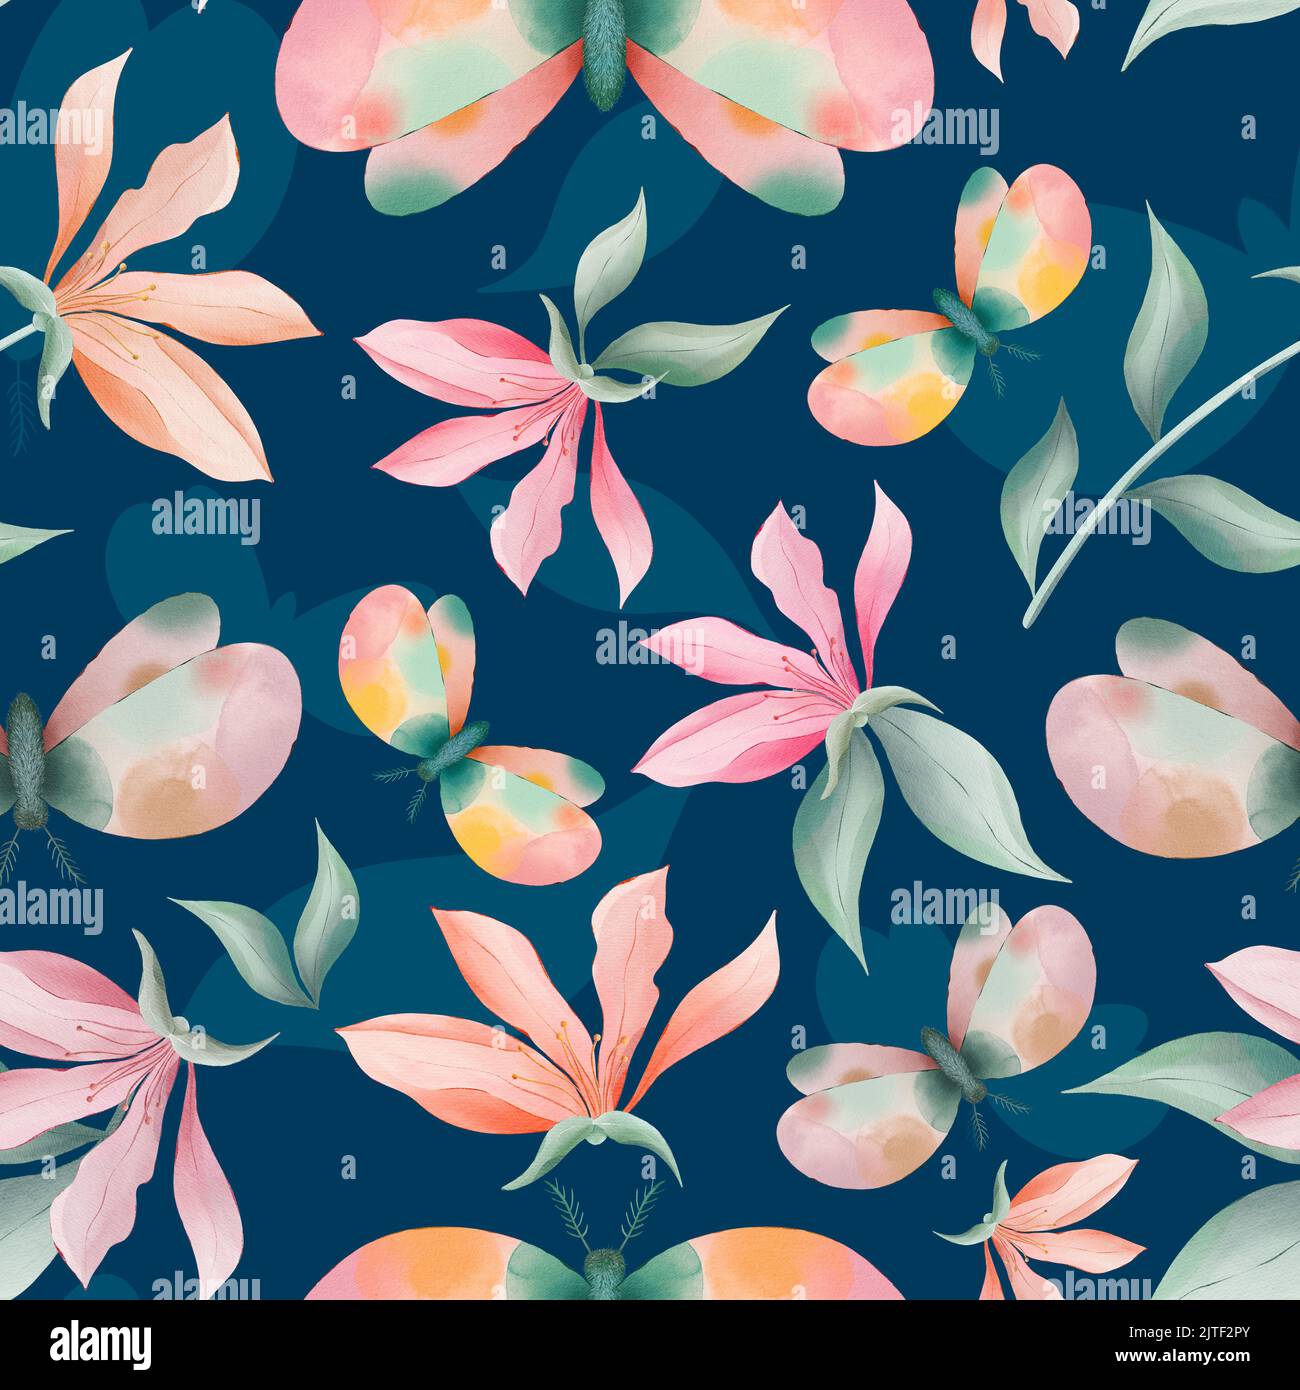 Magnolia flowers and moths seamless pattern Stock Photo